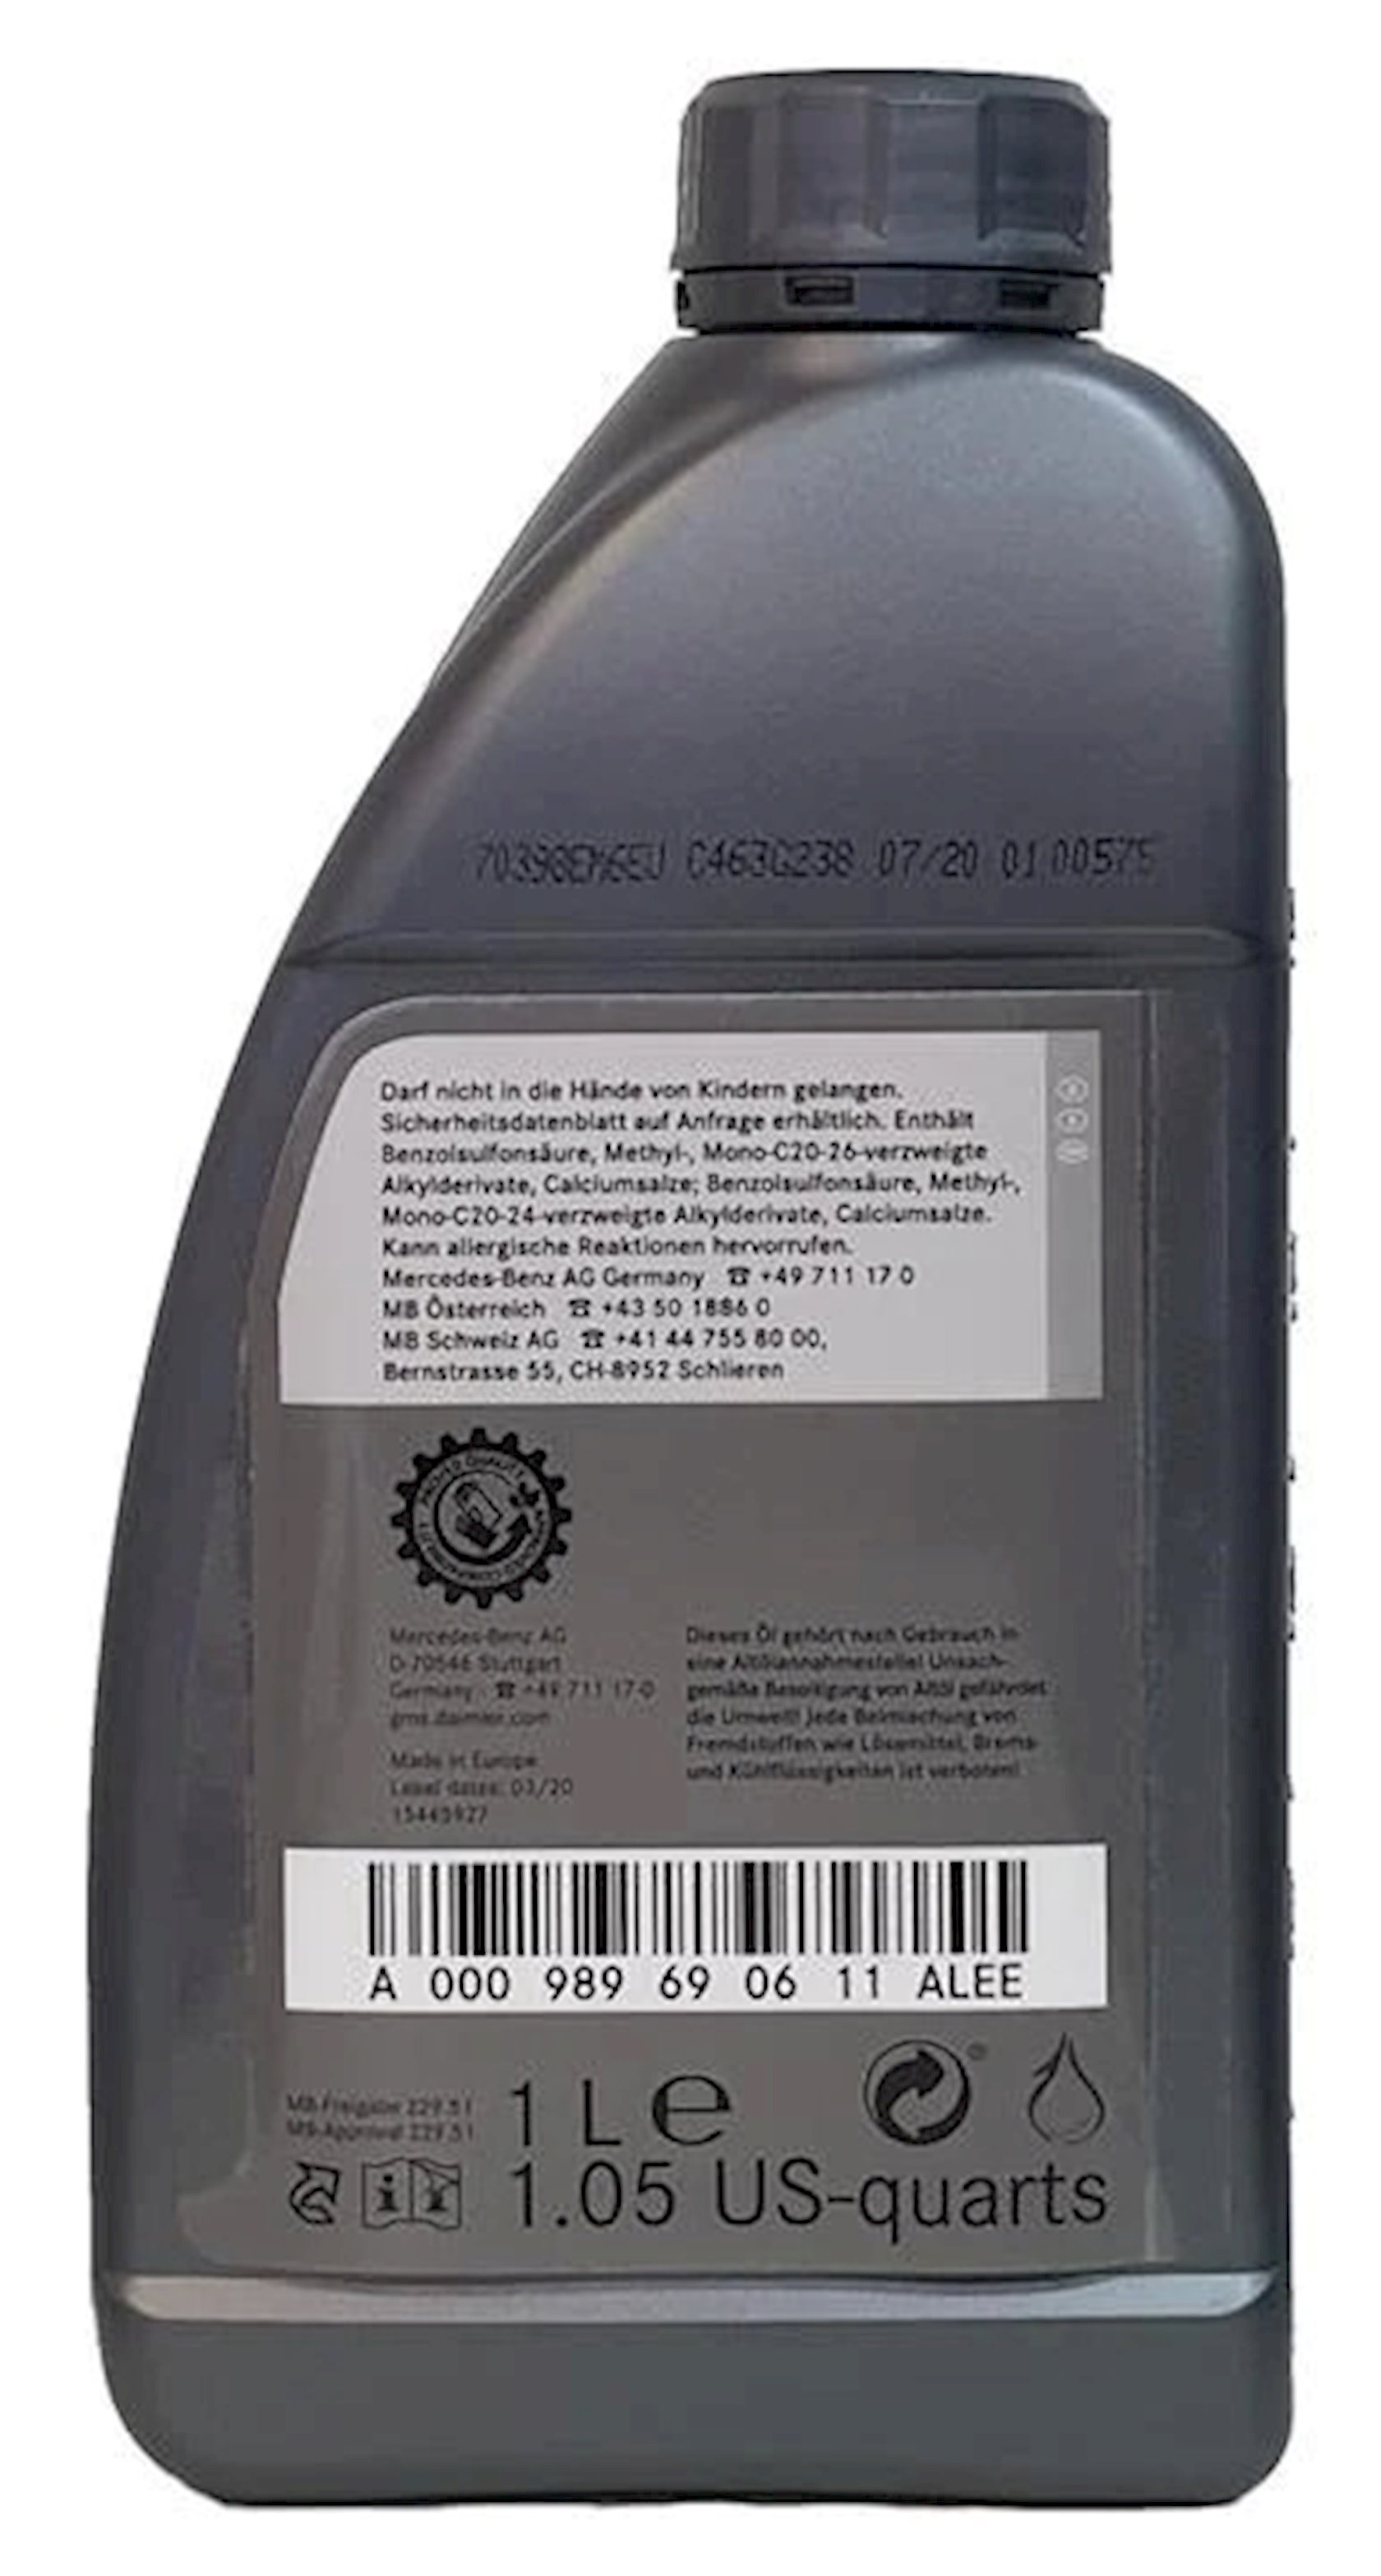  масло Mercedes МB Synthetic Engine Oil 5W-30 MB 229.51, 1 л .